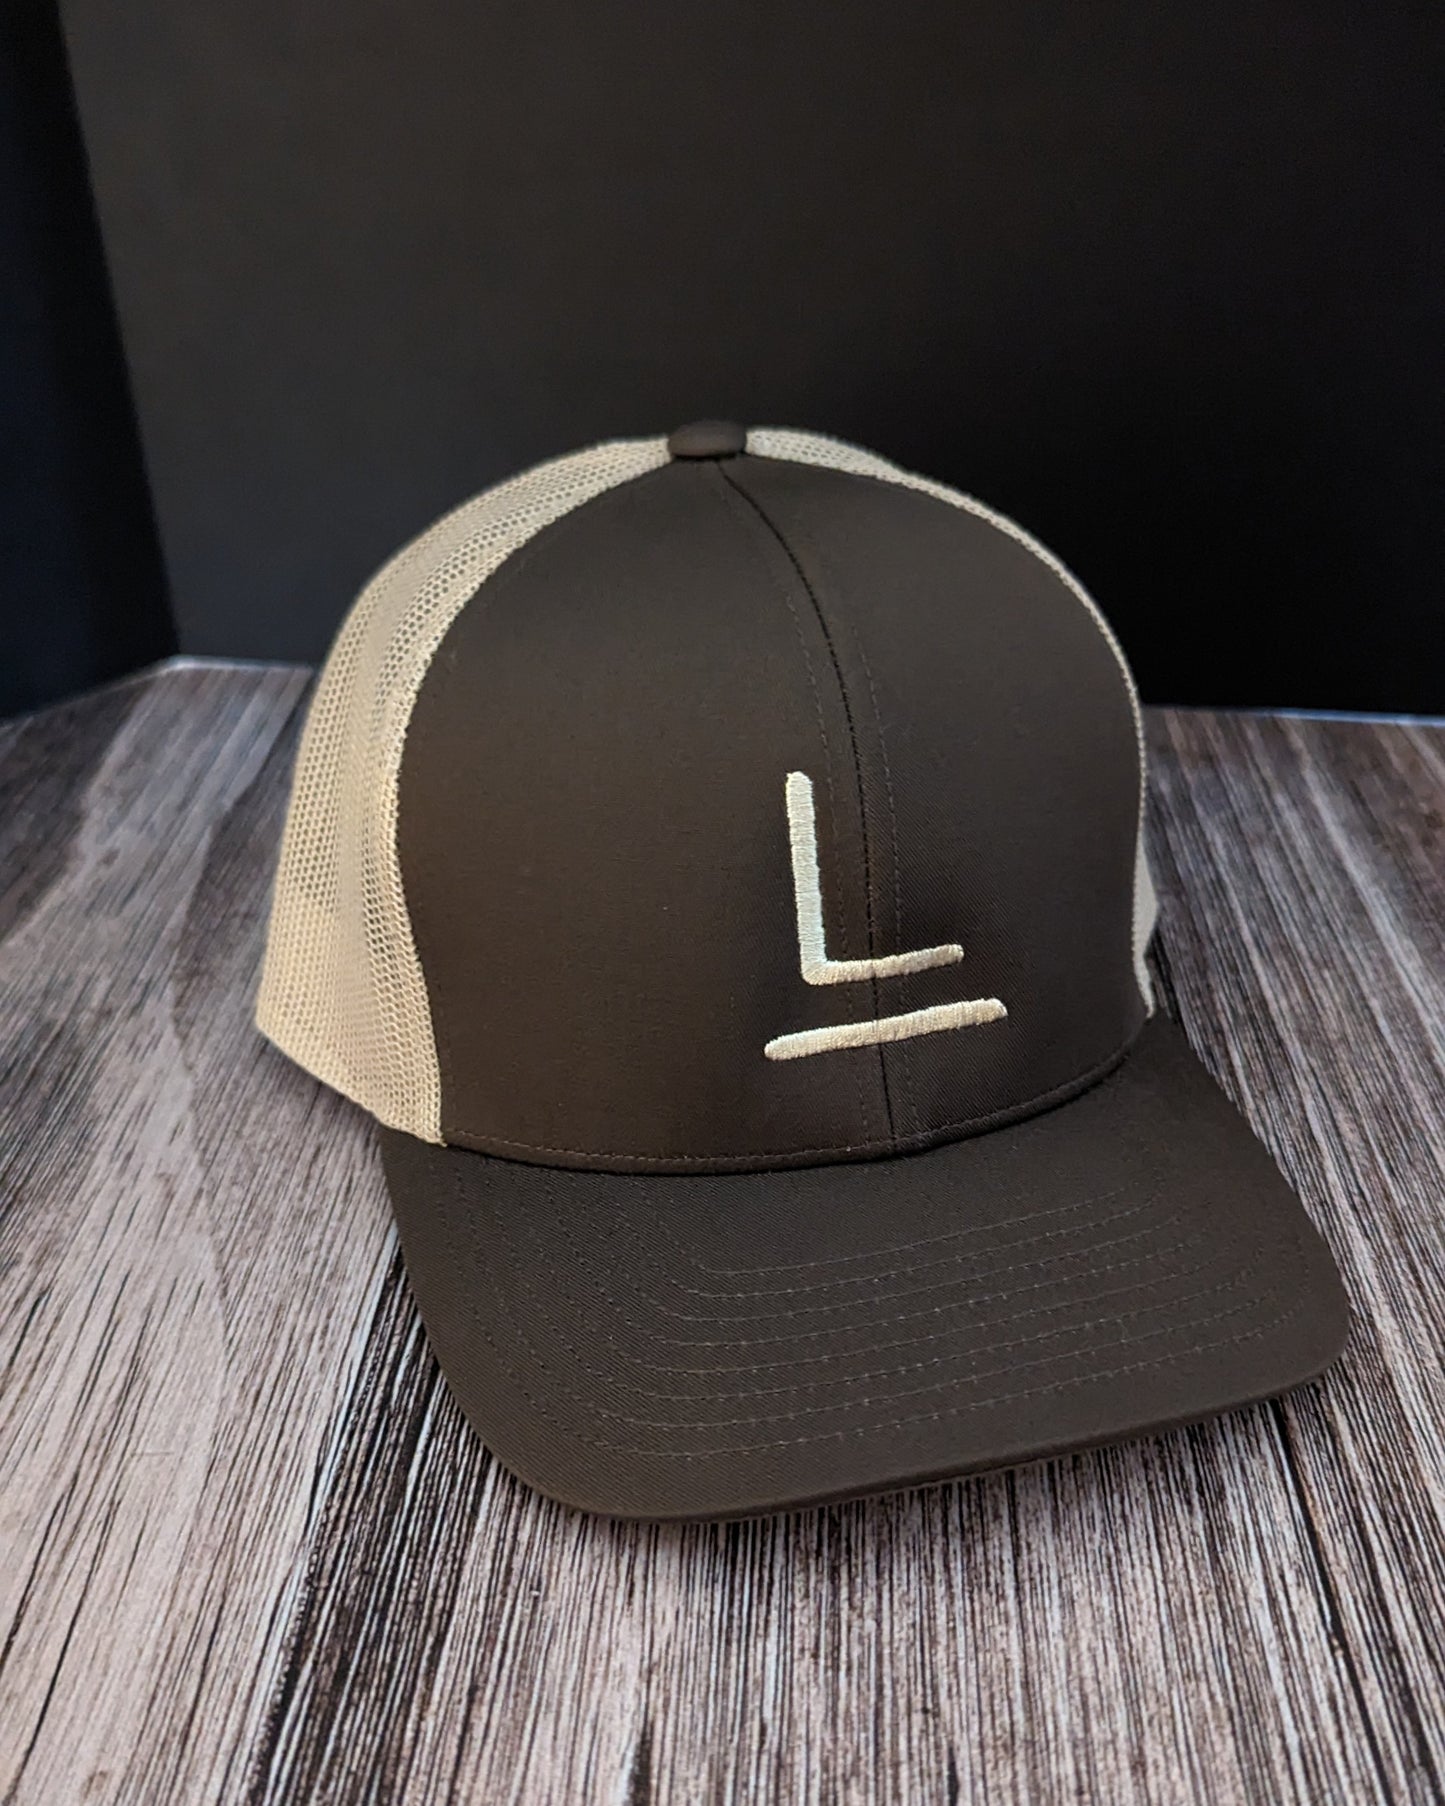 Copy of L Bar Ranch - Brown and Tan Trucker Hat